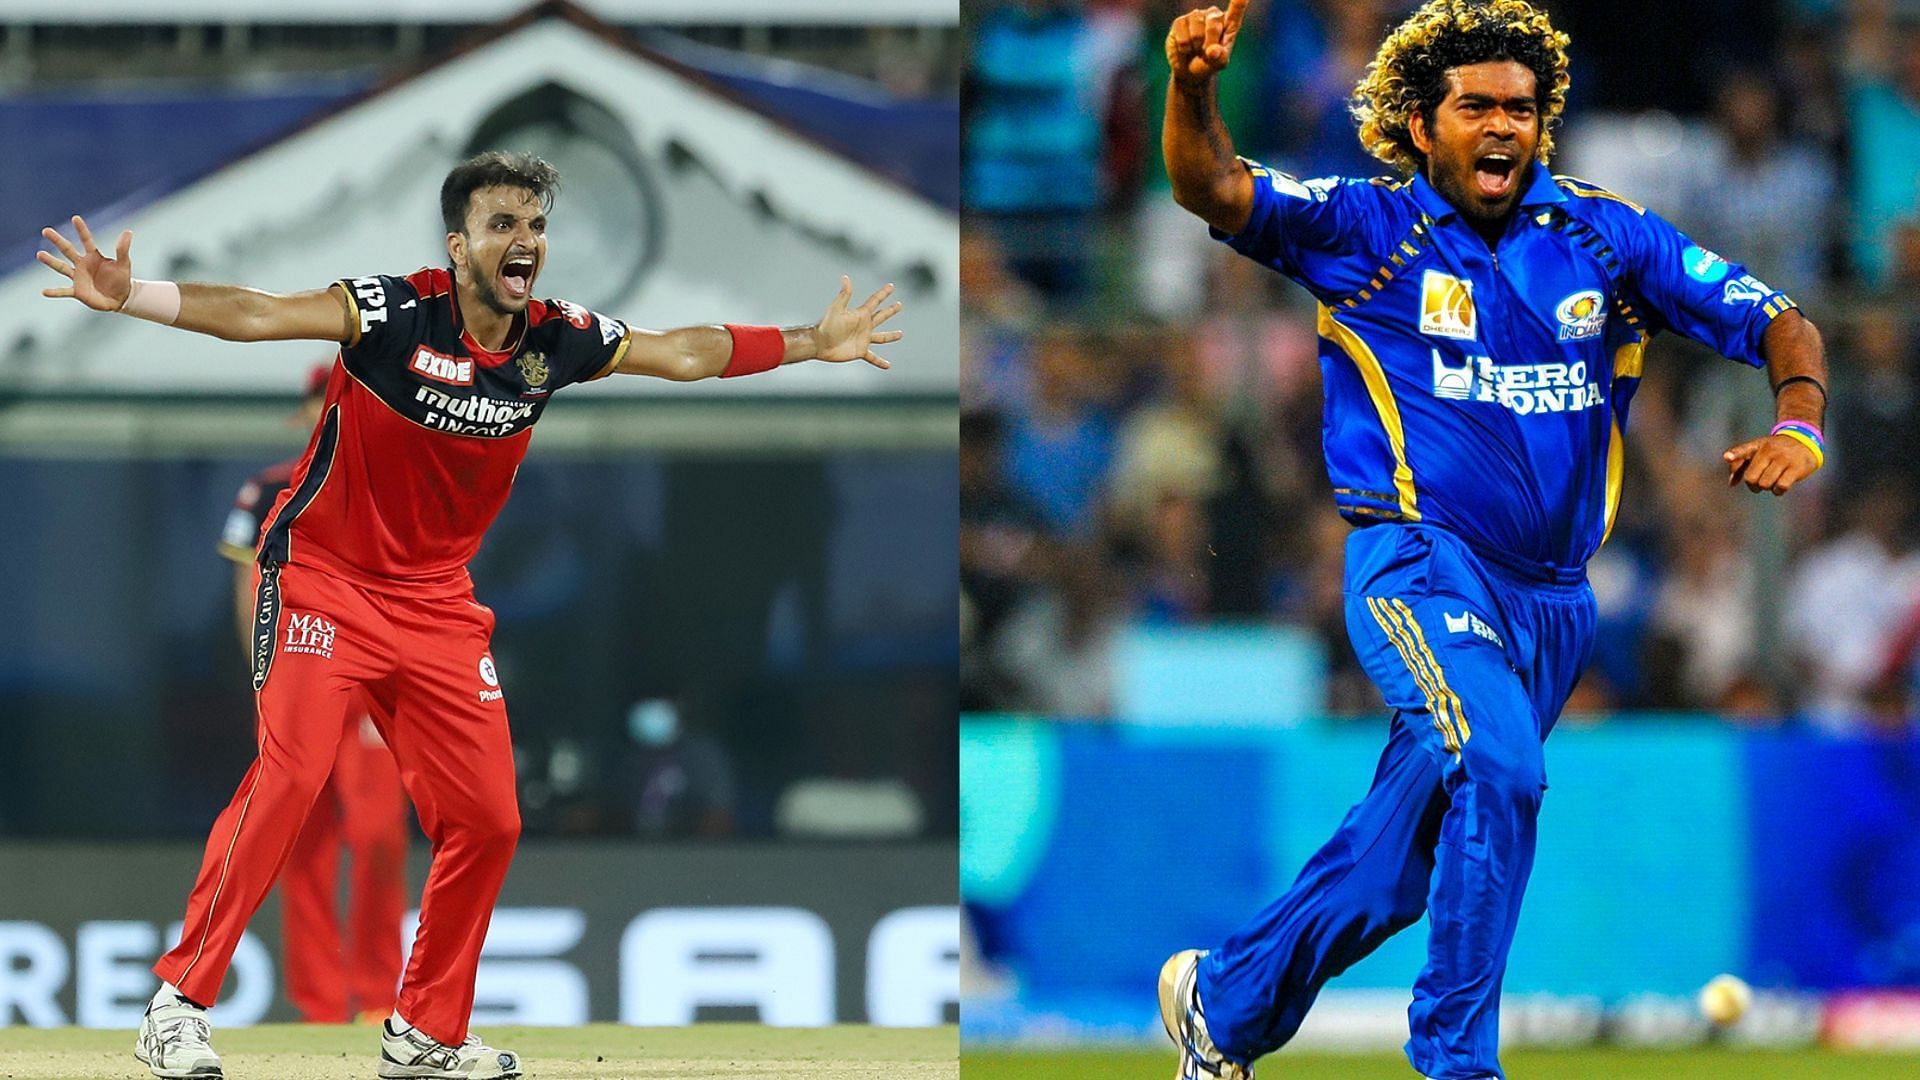 Harshal Patel has been the nemesis of Mumbai Indians in recent years with the ball.